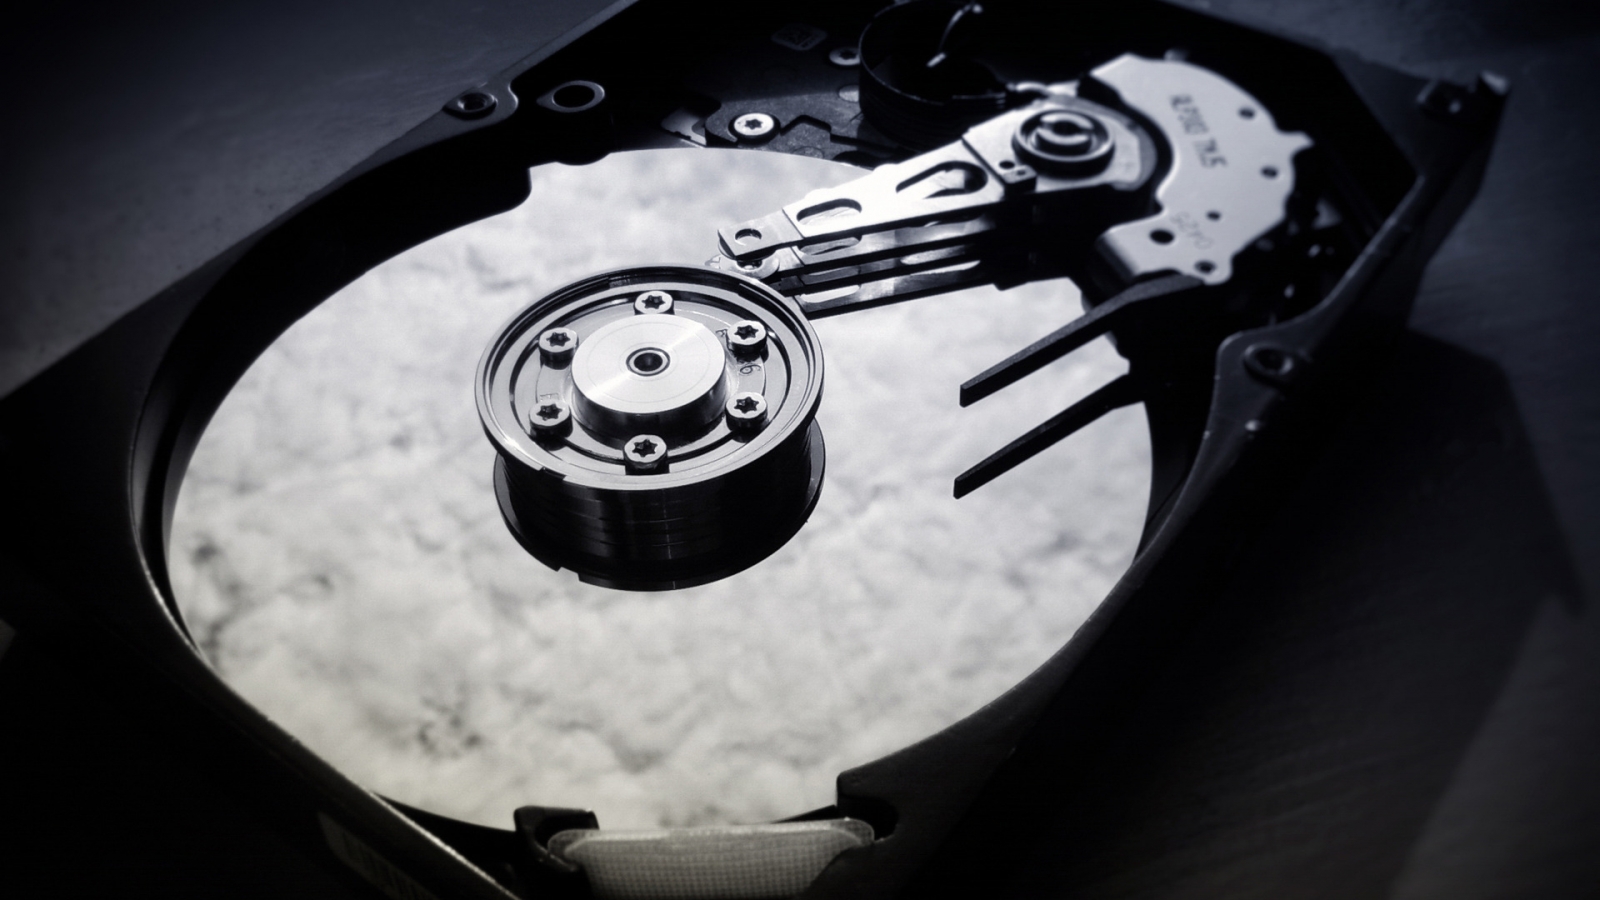 Hard Disk Drive for 1600 x 900 HDTV resolution